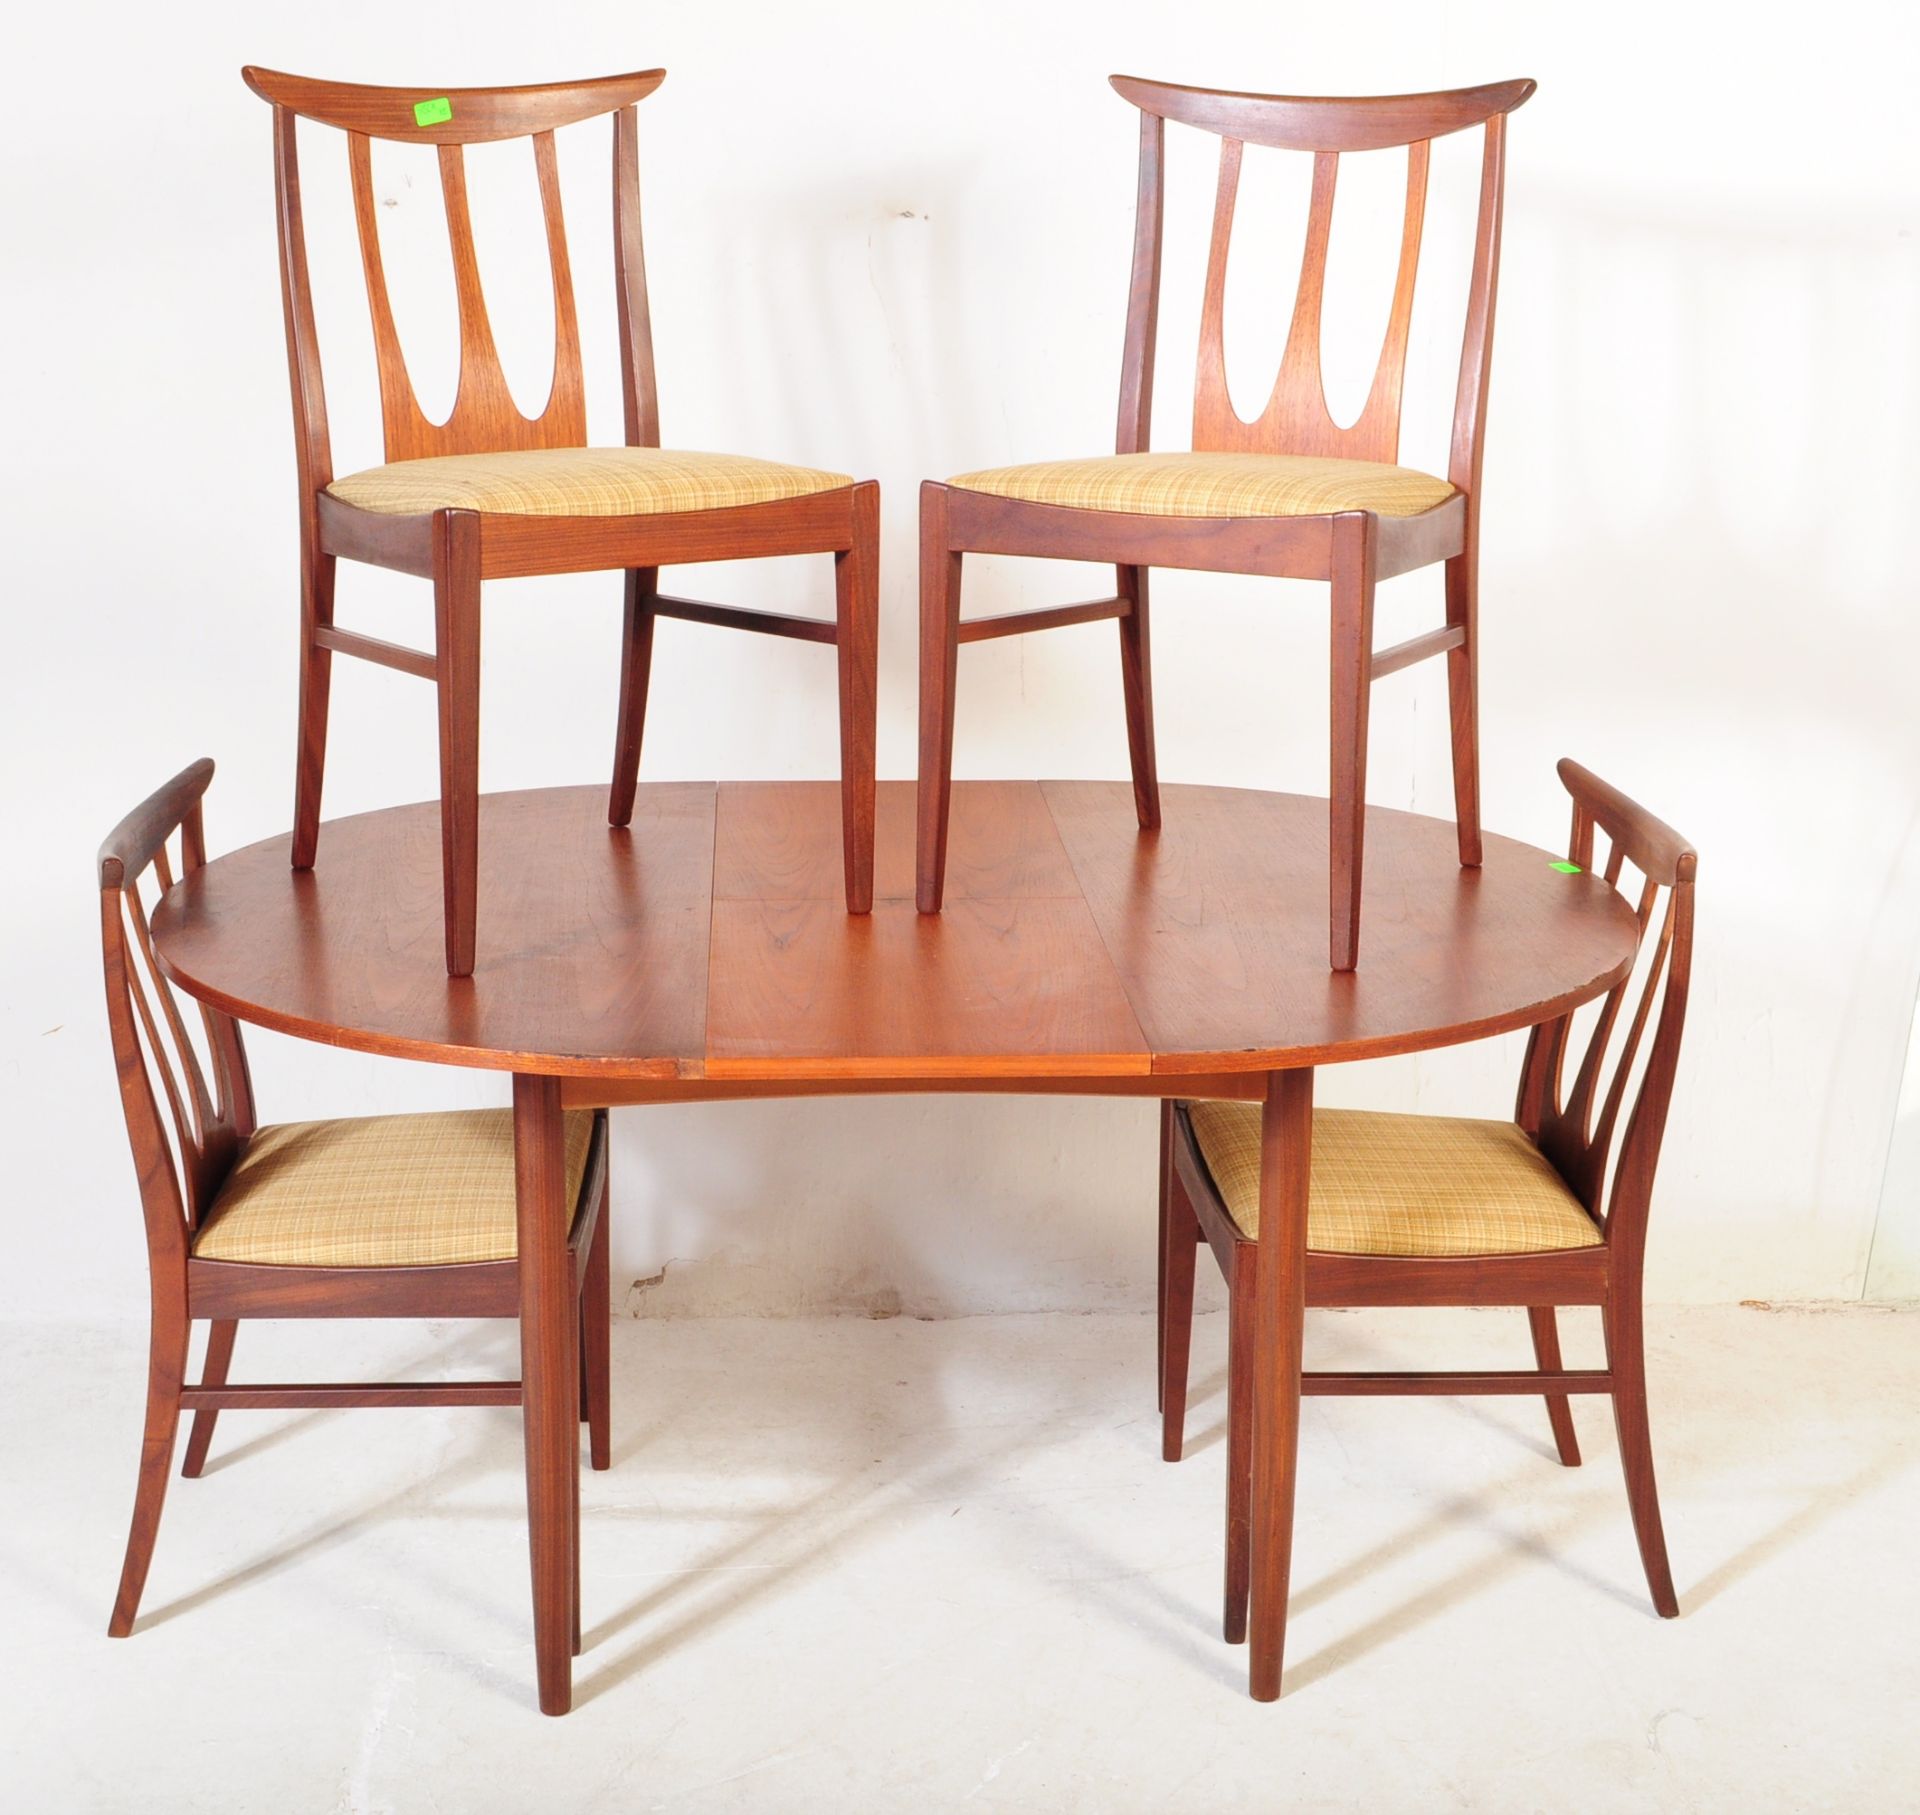 G PLAN - BRASILIAN RANGE - 1960S DINING TABLE AND SIX CHAIRS - Image 2 of 9